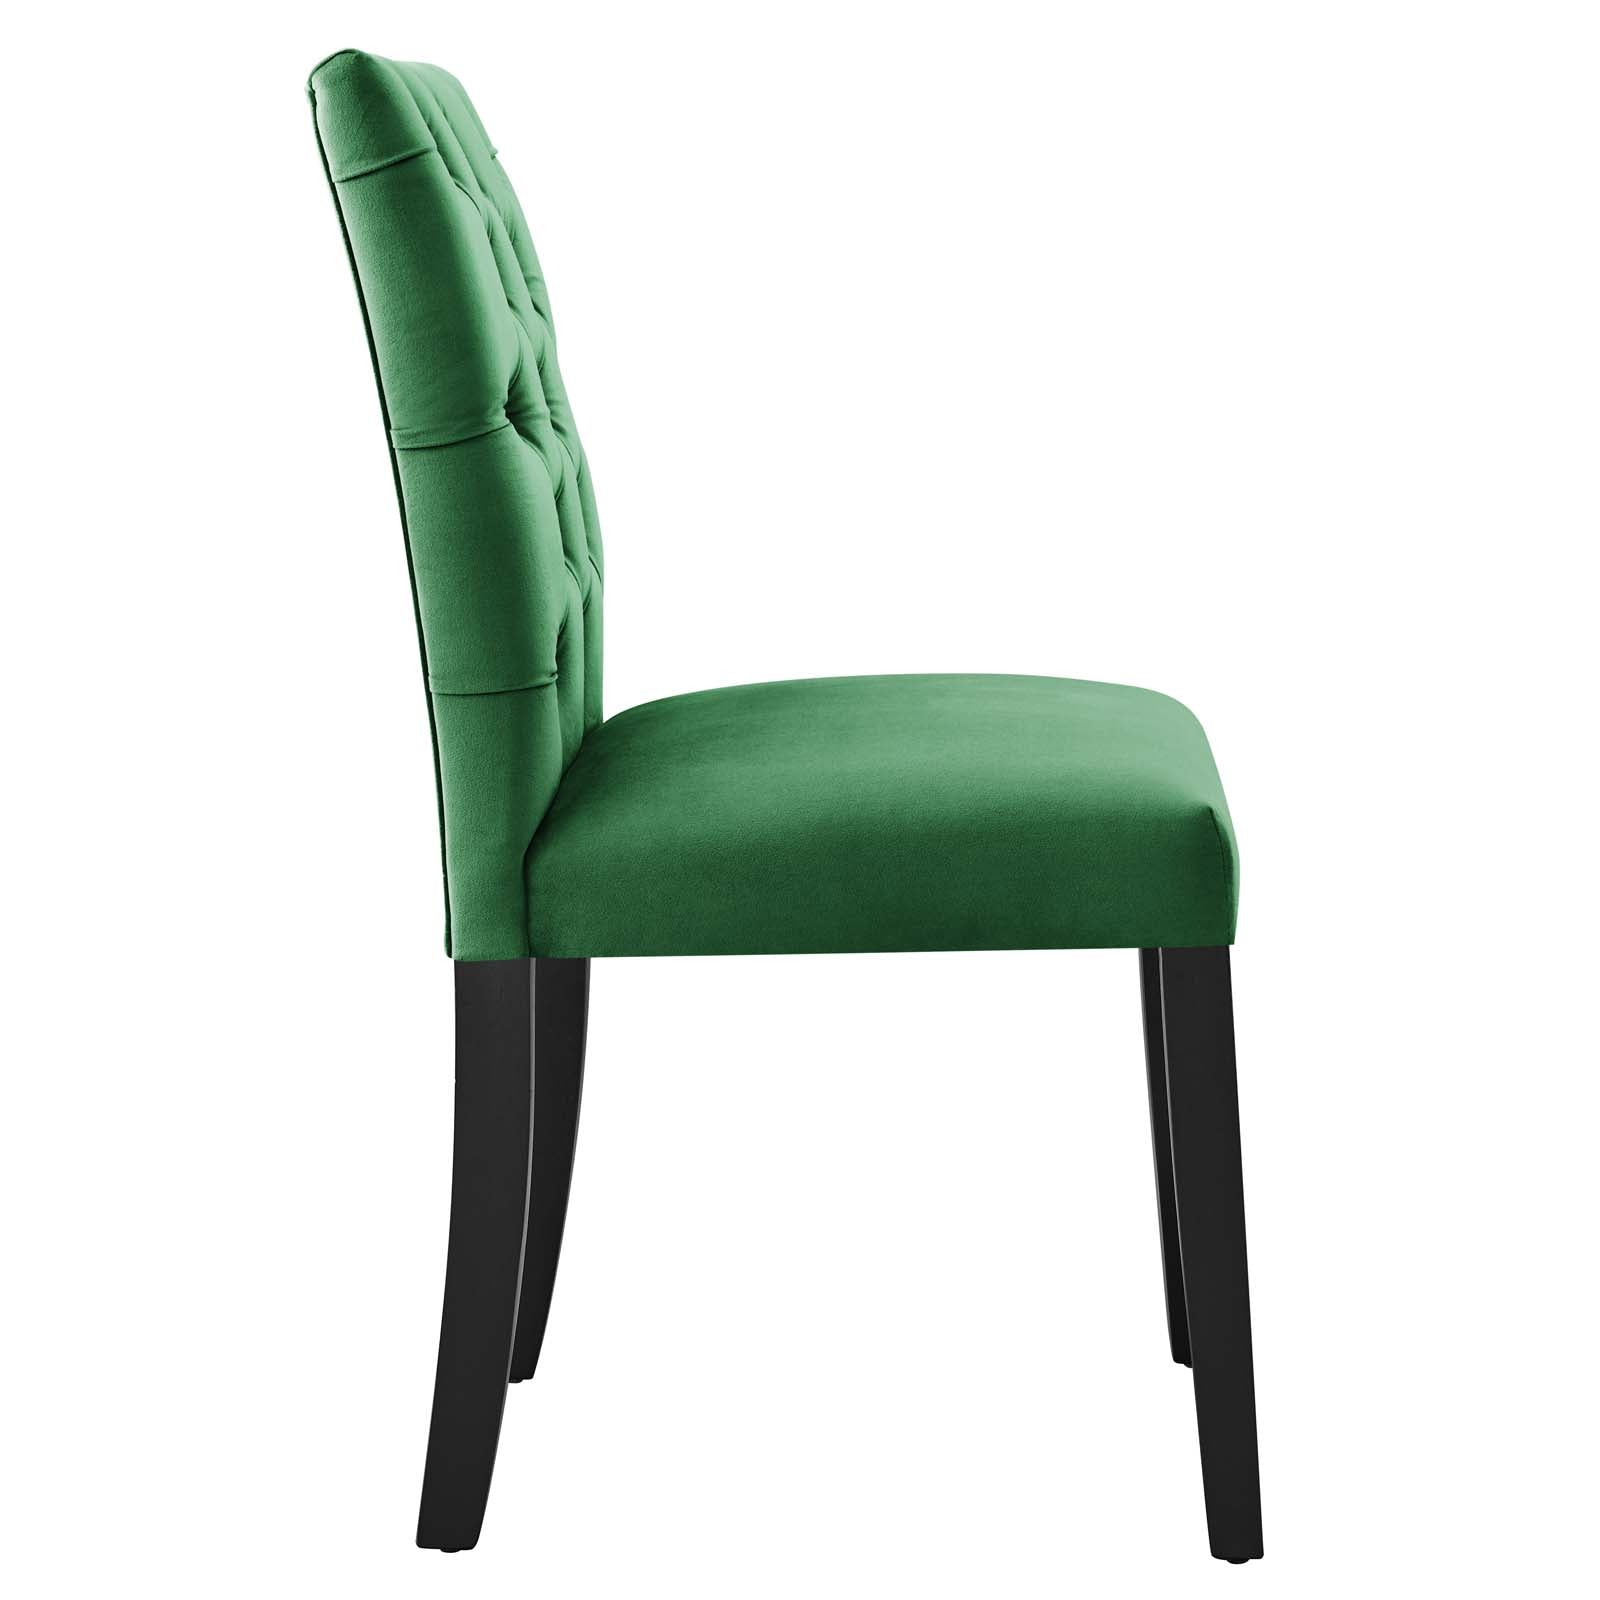 Modway Dining Chairs - Duchess Performance Velvet Dining Chairs - Set of 2 Emerald